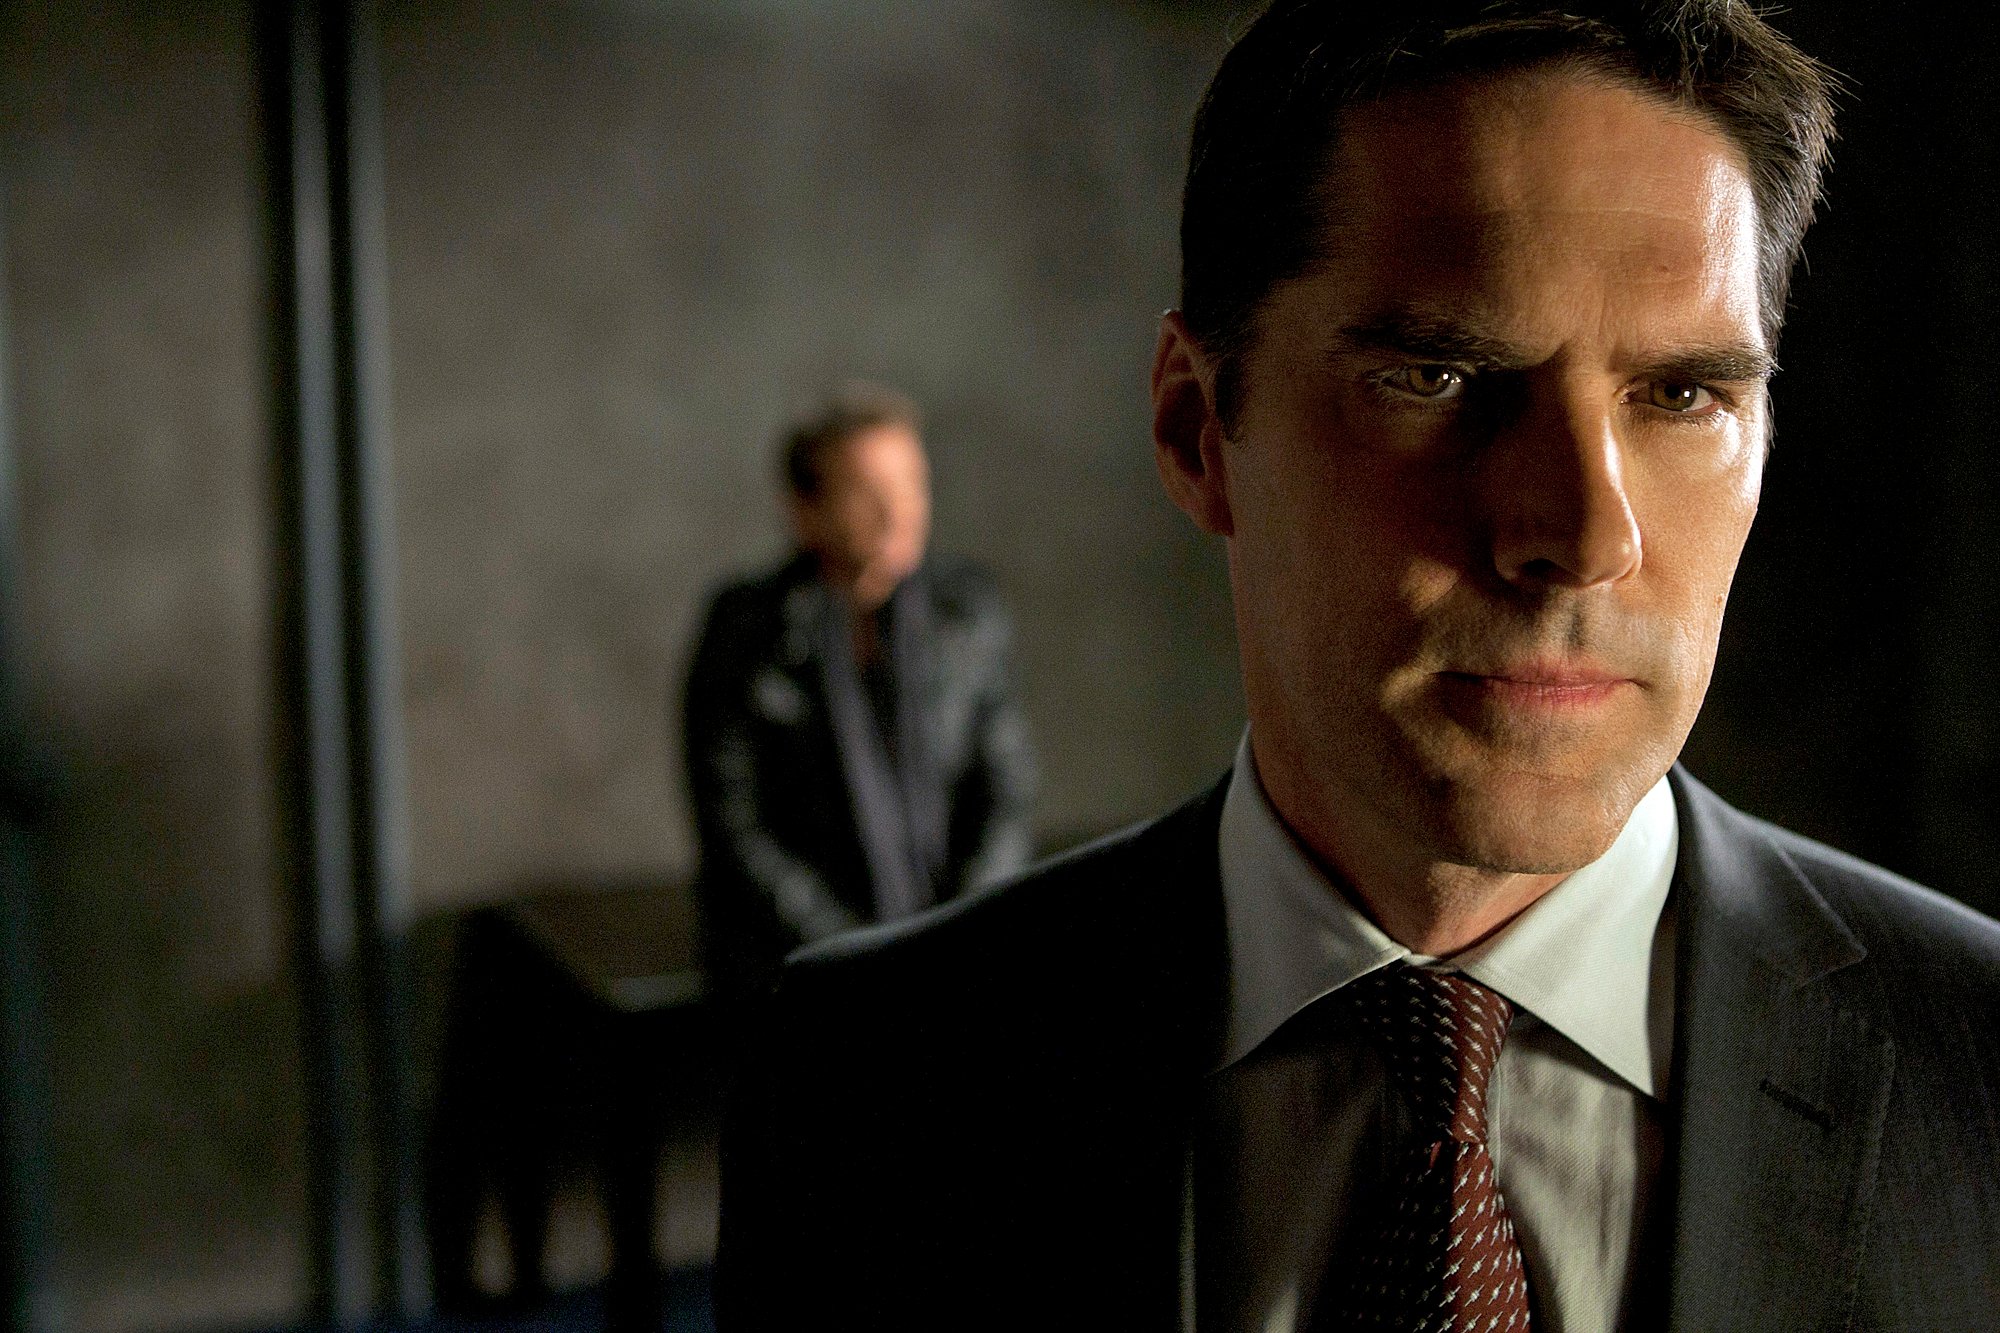 Thomas Gibson Criminal Minds character is Hotch, pictured here.